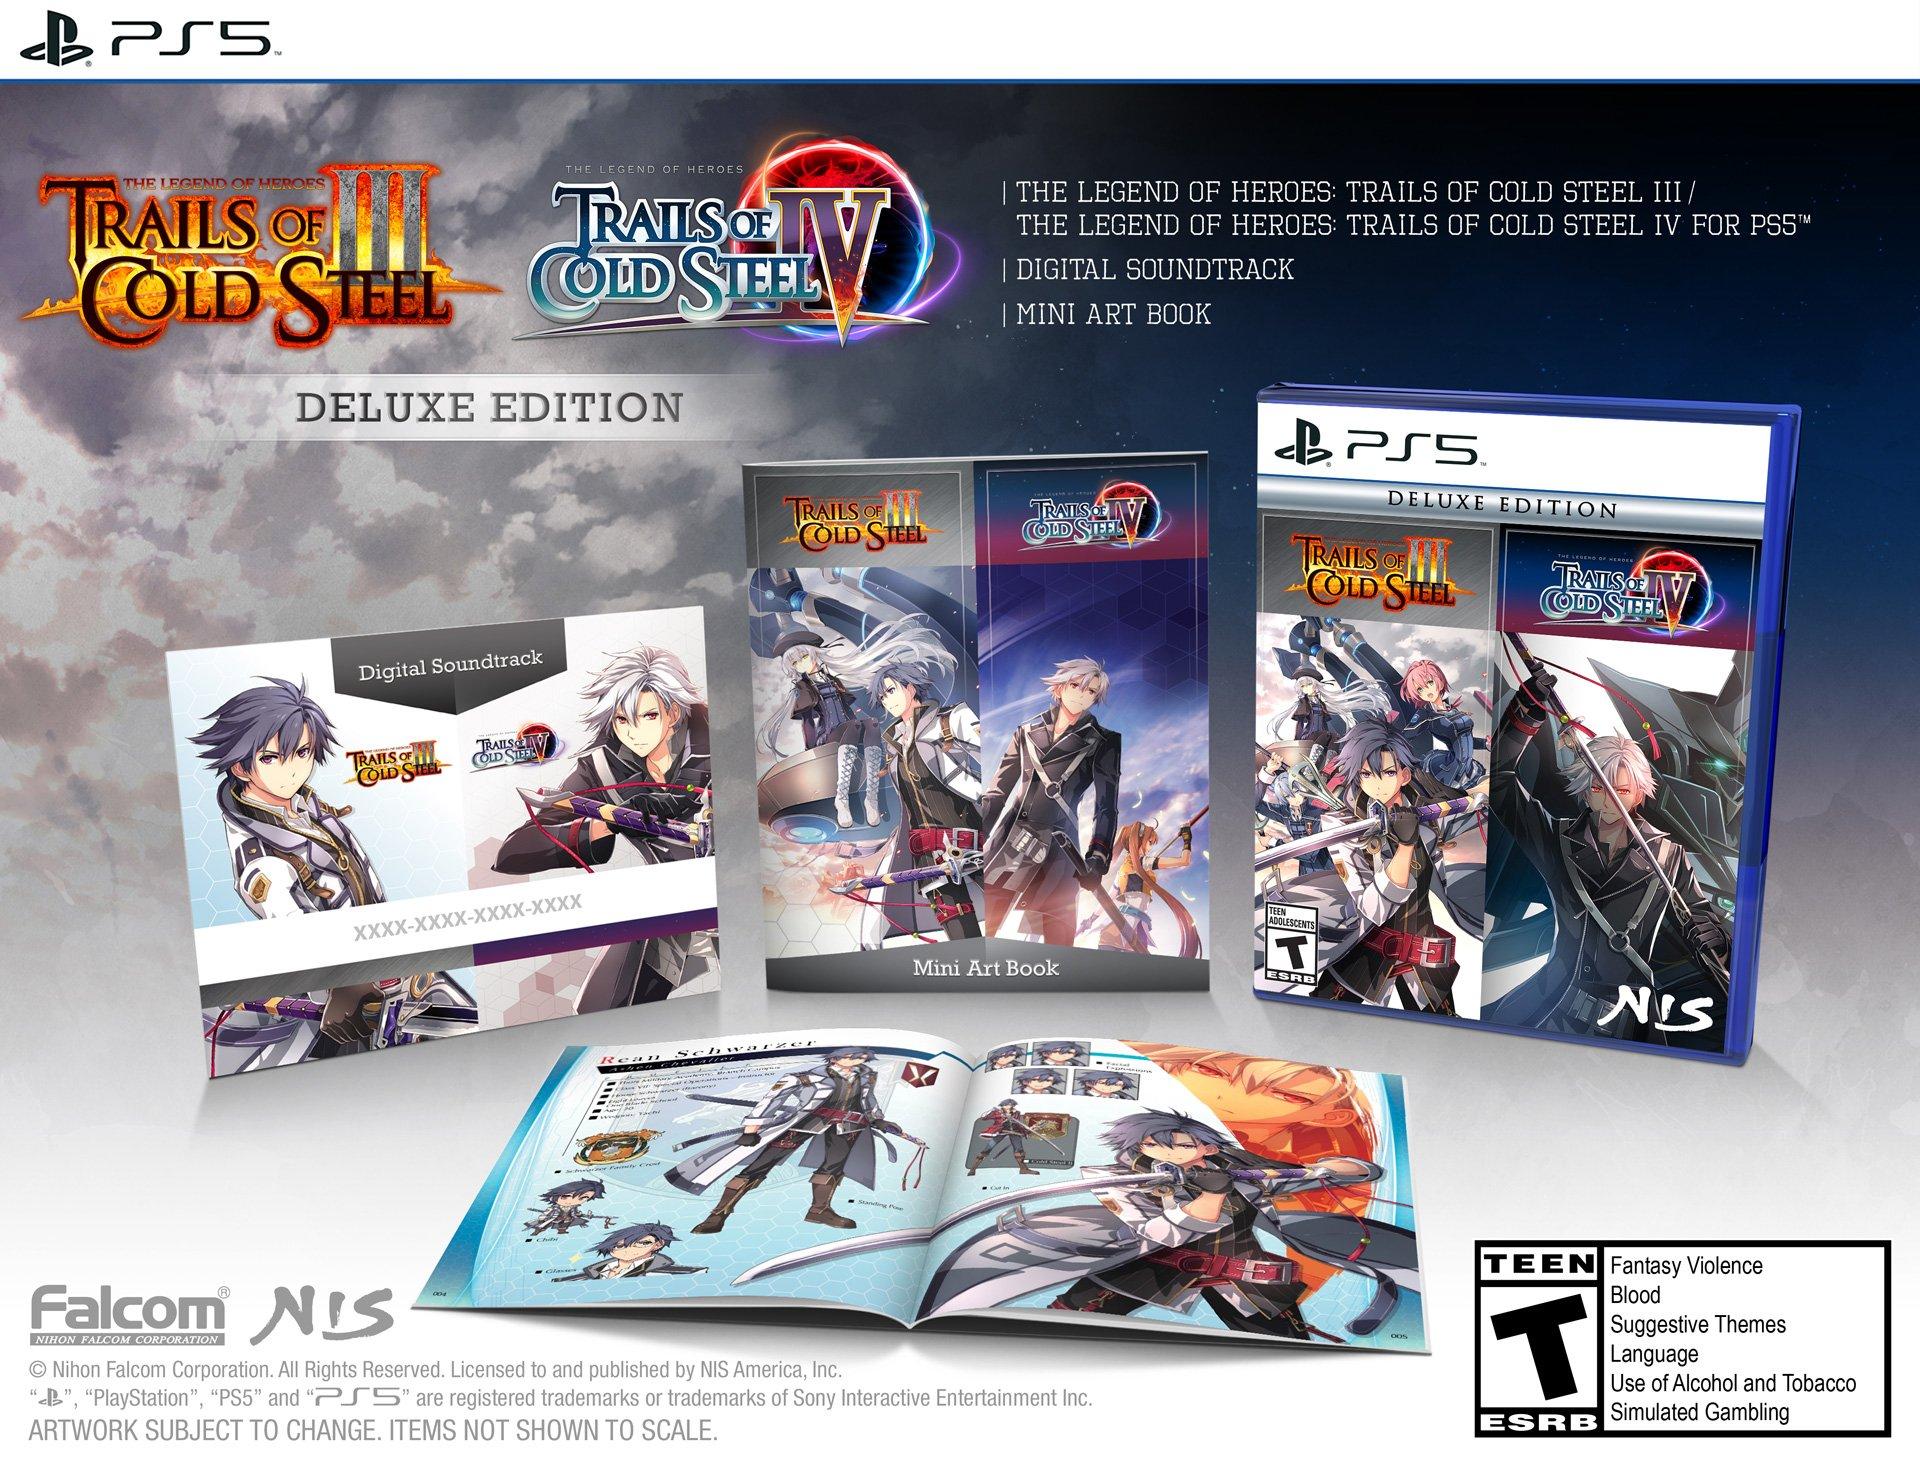 The Legend of Heroes: Trails of Cold Steel III / The Legend of Heroes: Trails of Cold Steel IV - Deluxe Edition - PlayStation 5